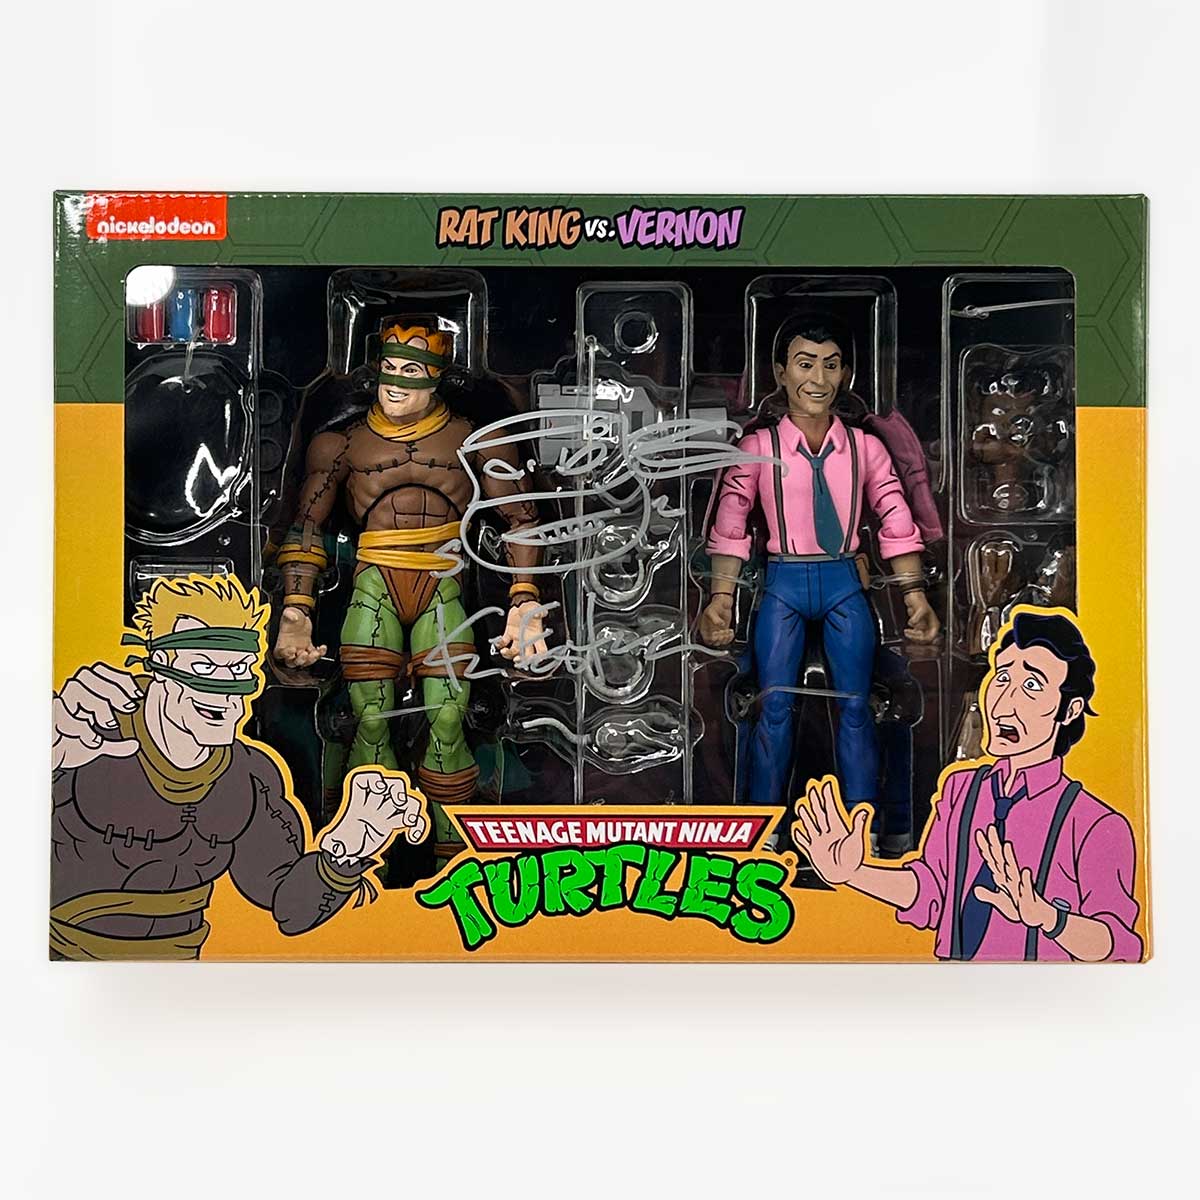 NECA/Team Eastman Exclusives Department is Fully Stocked